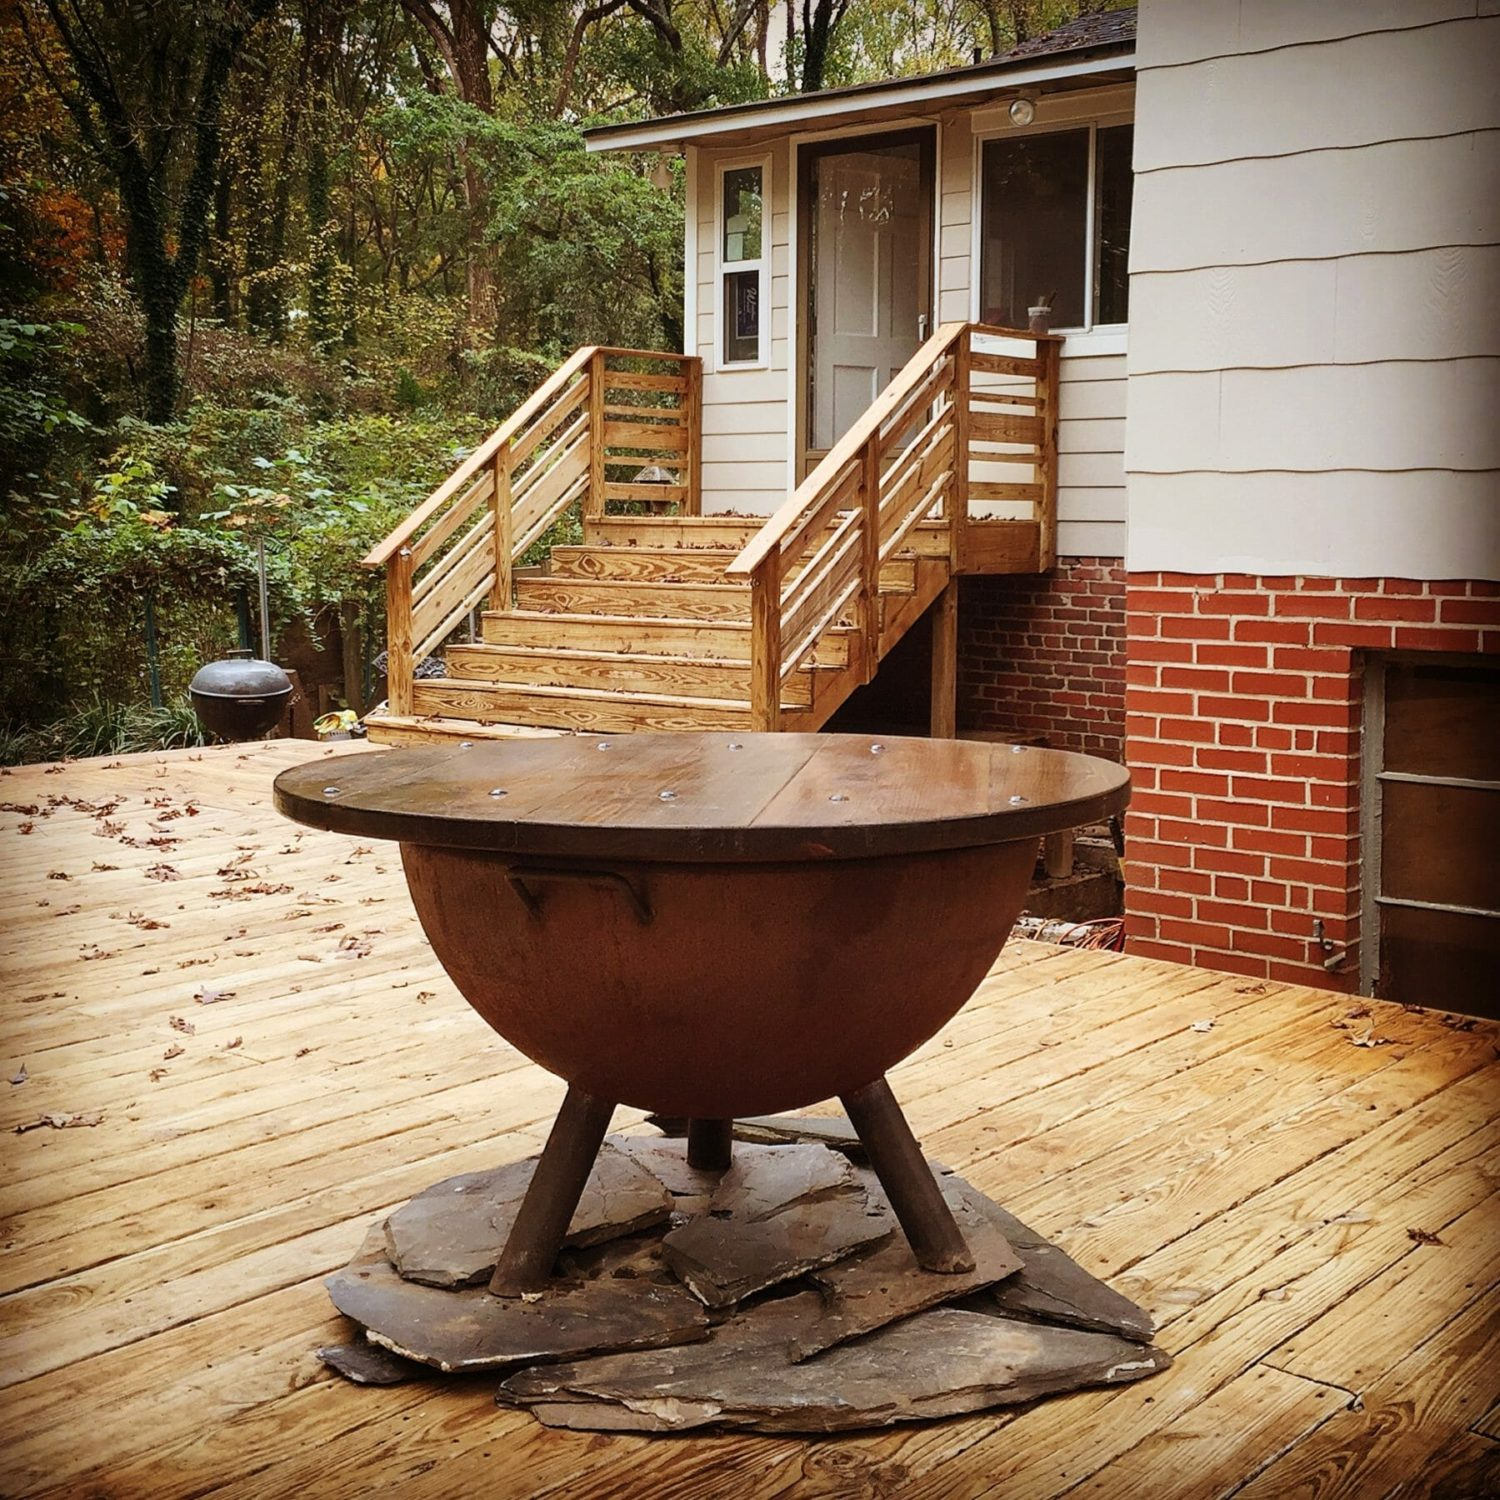 Gas Fire Pit Safe For Wood Deck • Bulbs Ideas